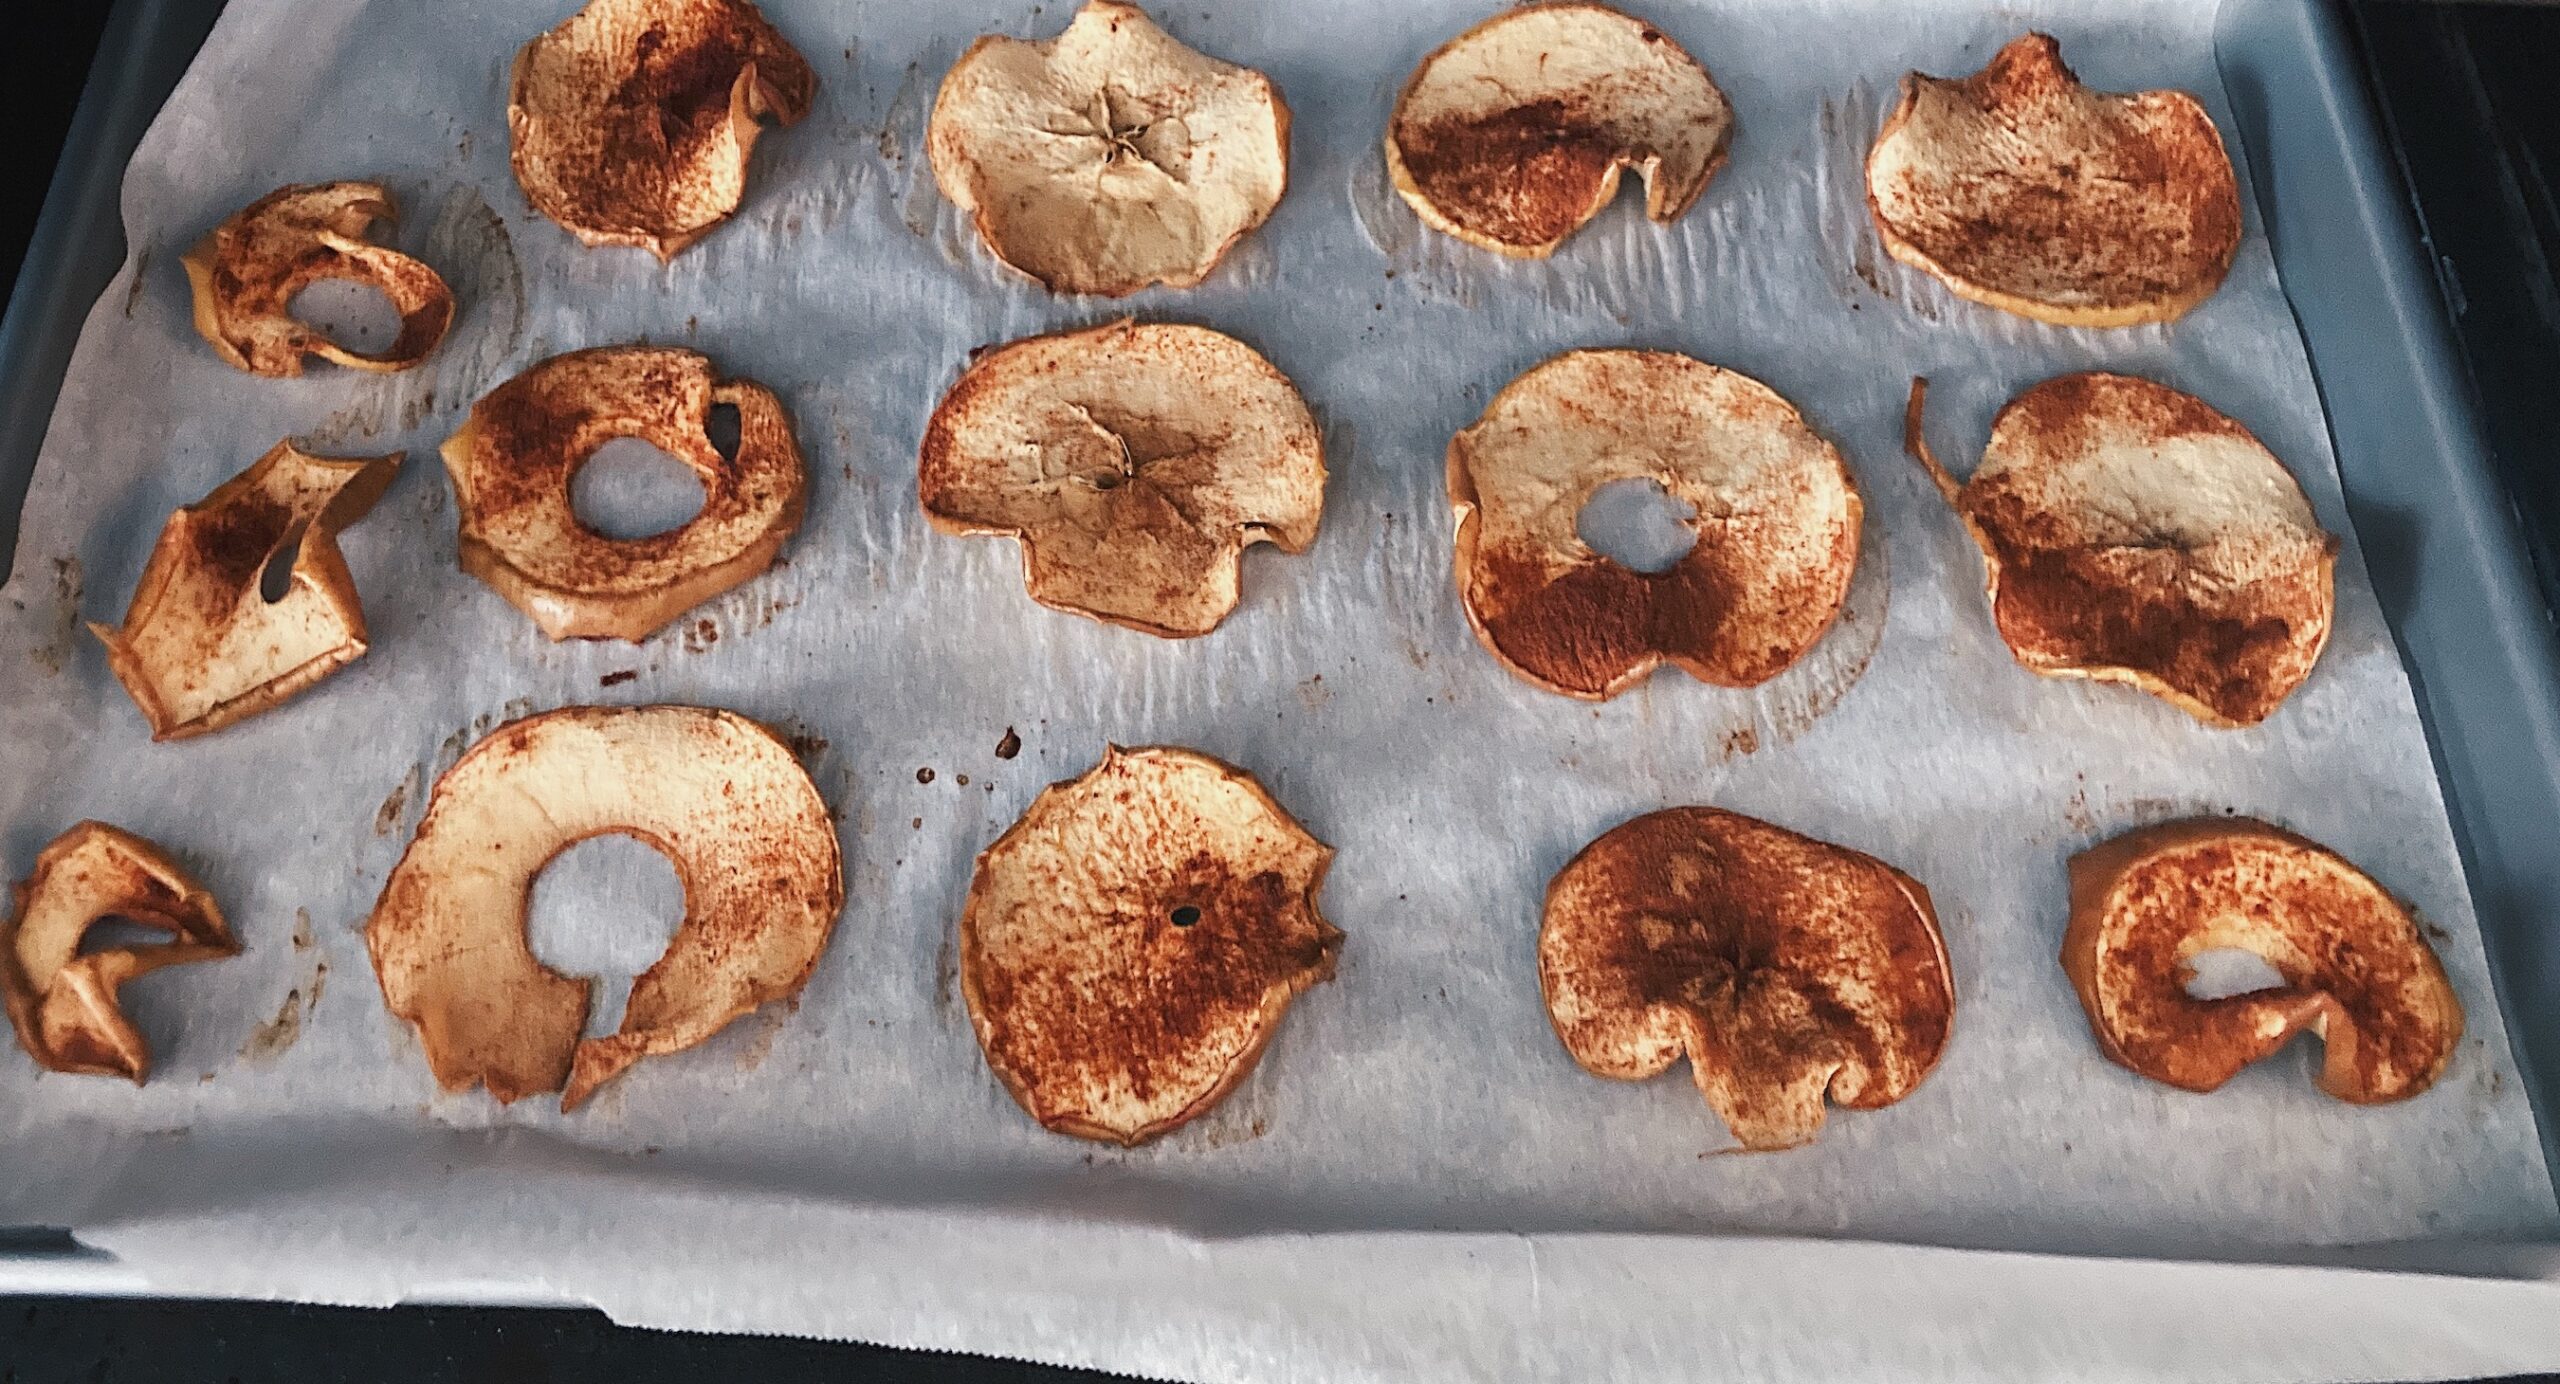 dehydrated apples in oven on tray